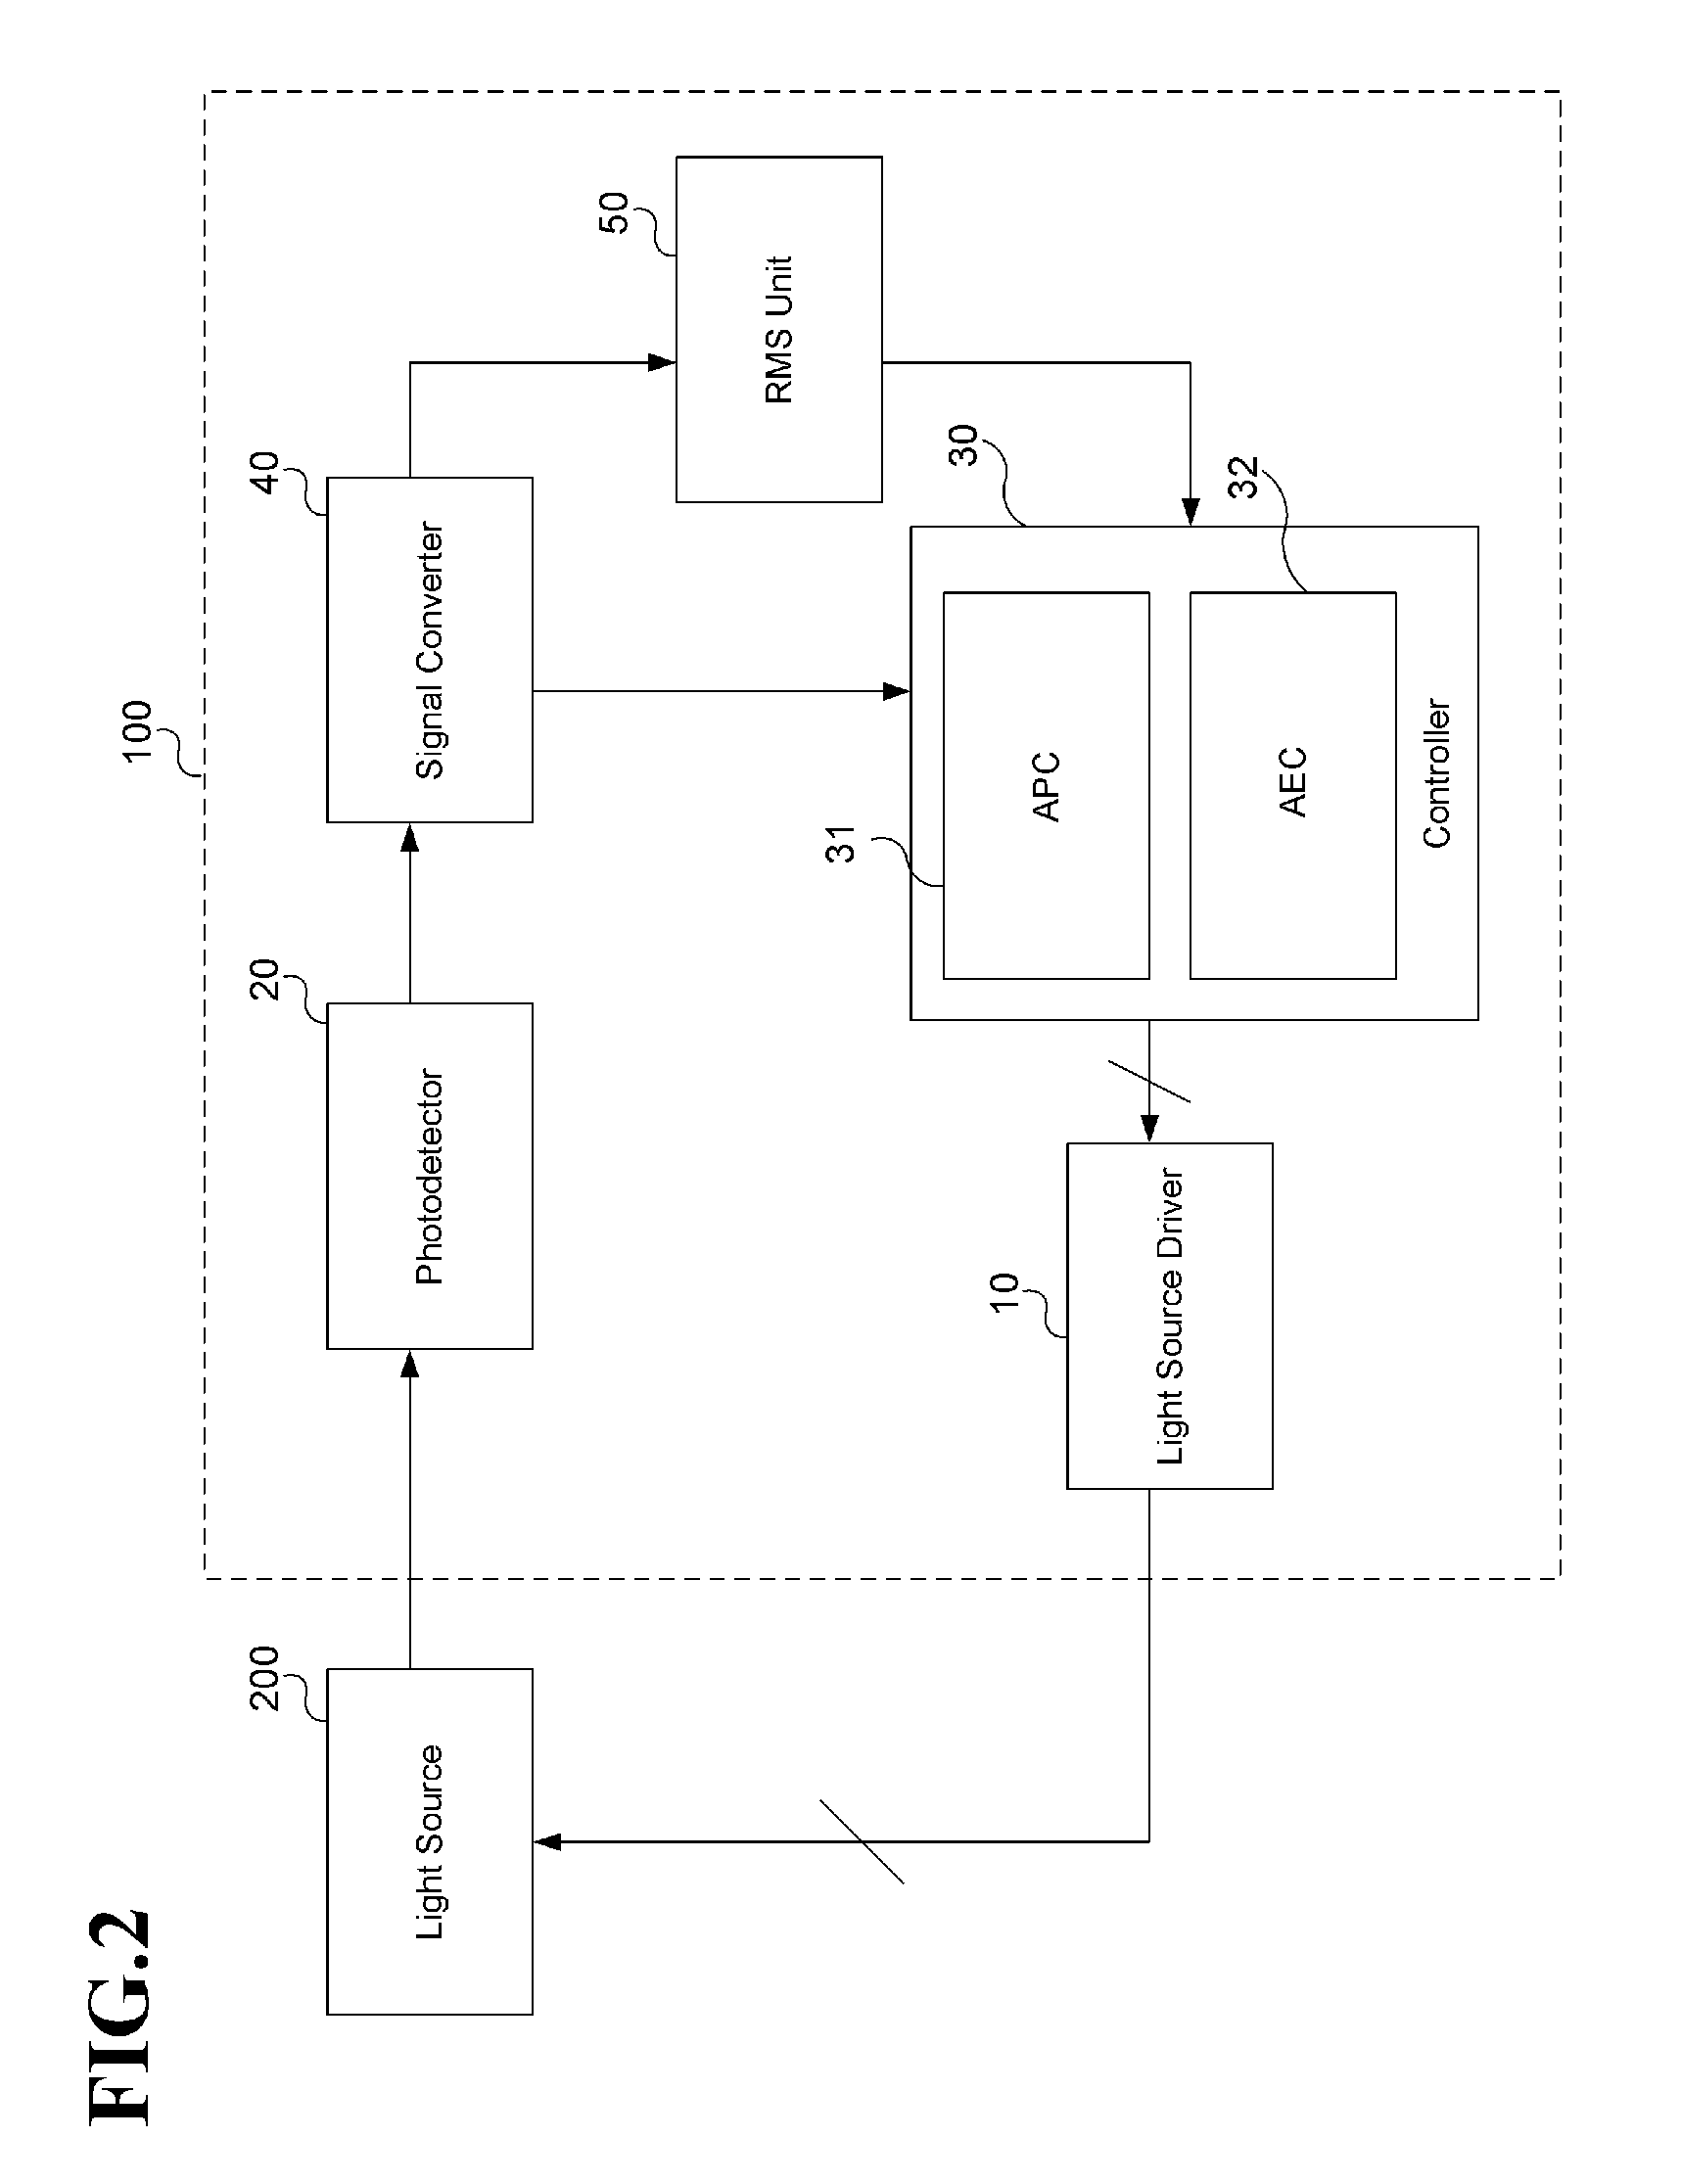 Apparatus and method for controlling optical power and extinction ratio